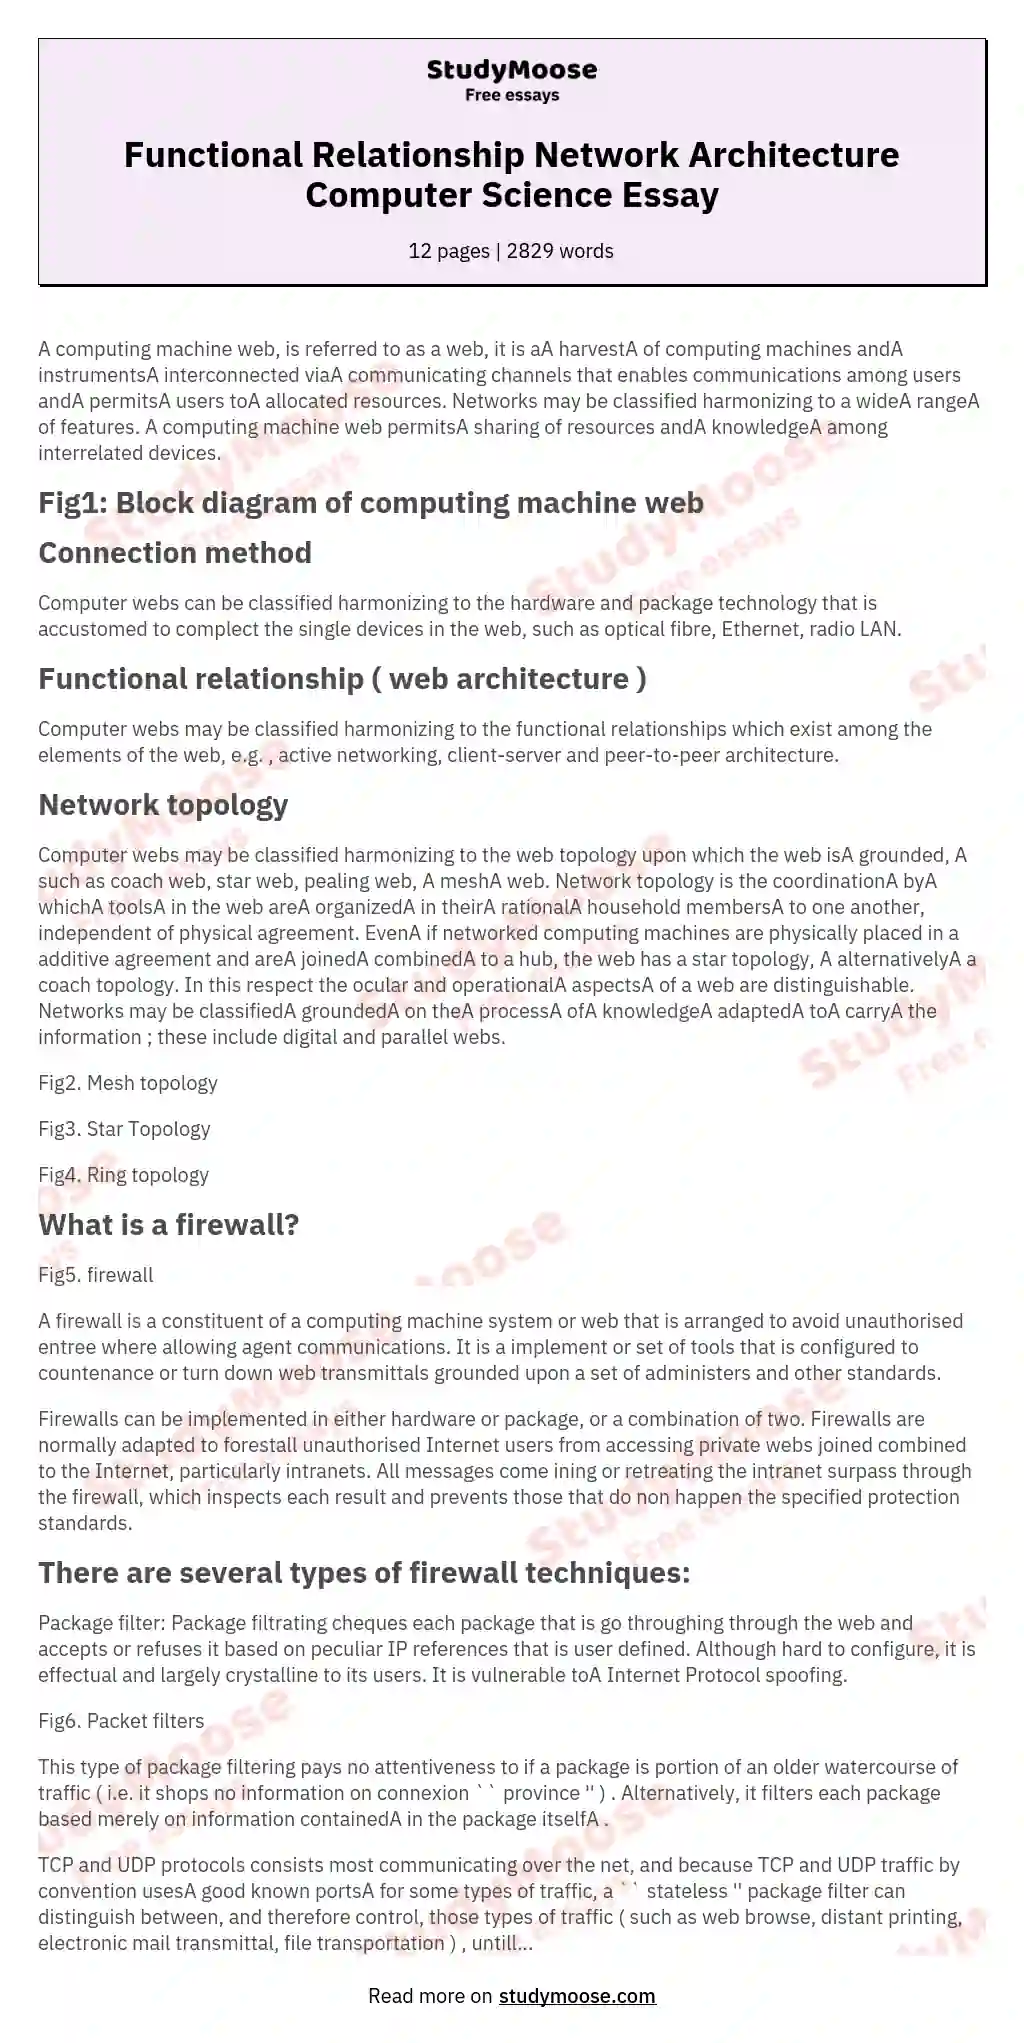 Functional Relationship Network Architecture Computer Science Essay essay